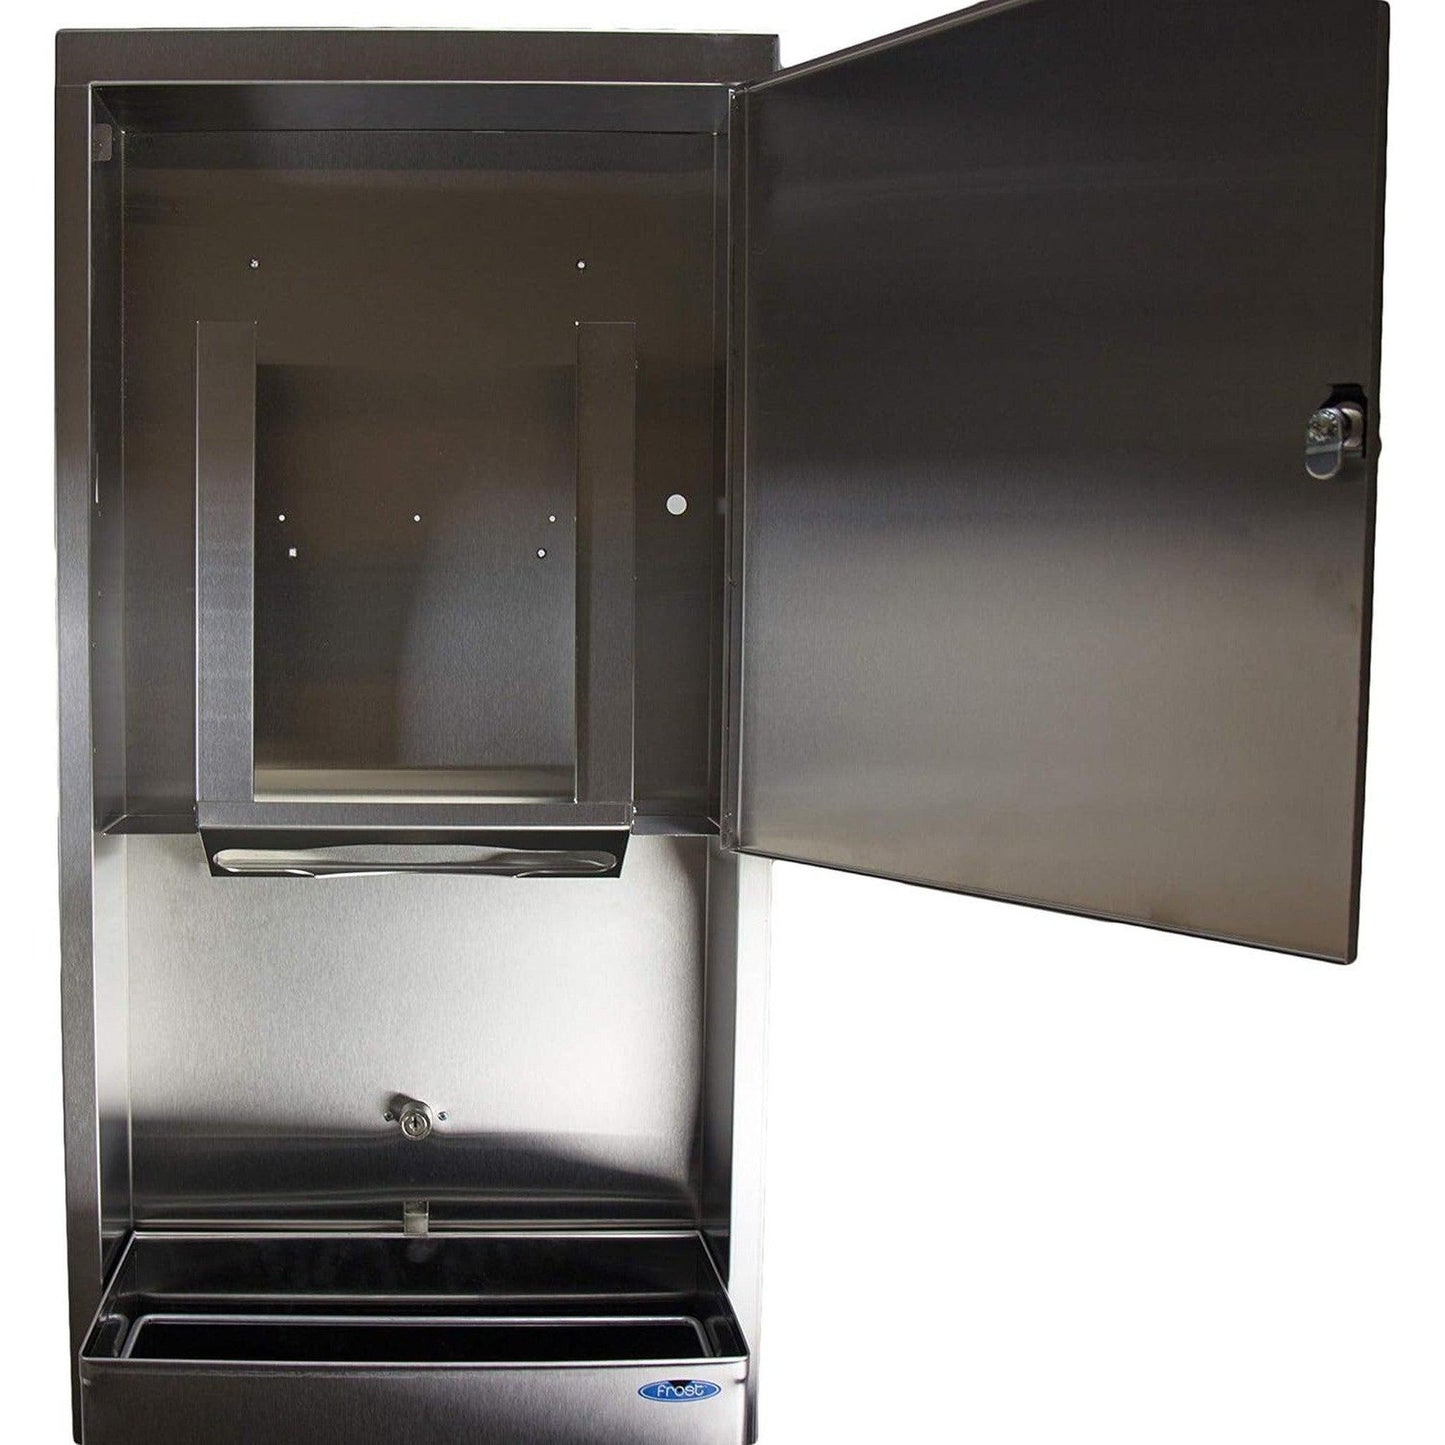 Frost 422C Wall Mounted Stainless Steel Paper Dispenser and Disposal